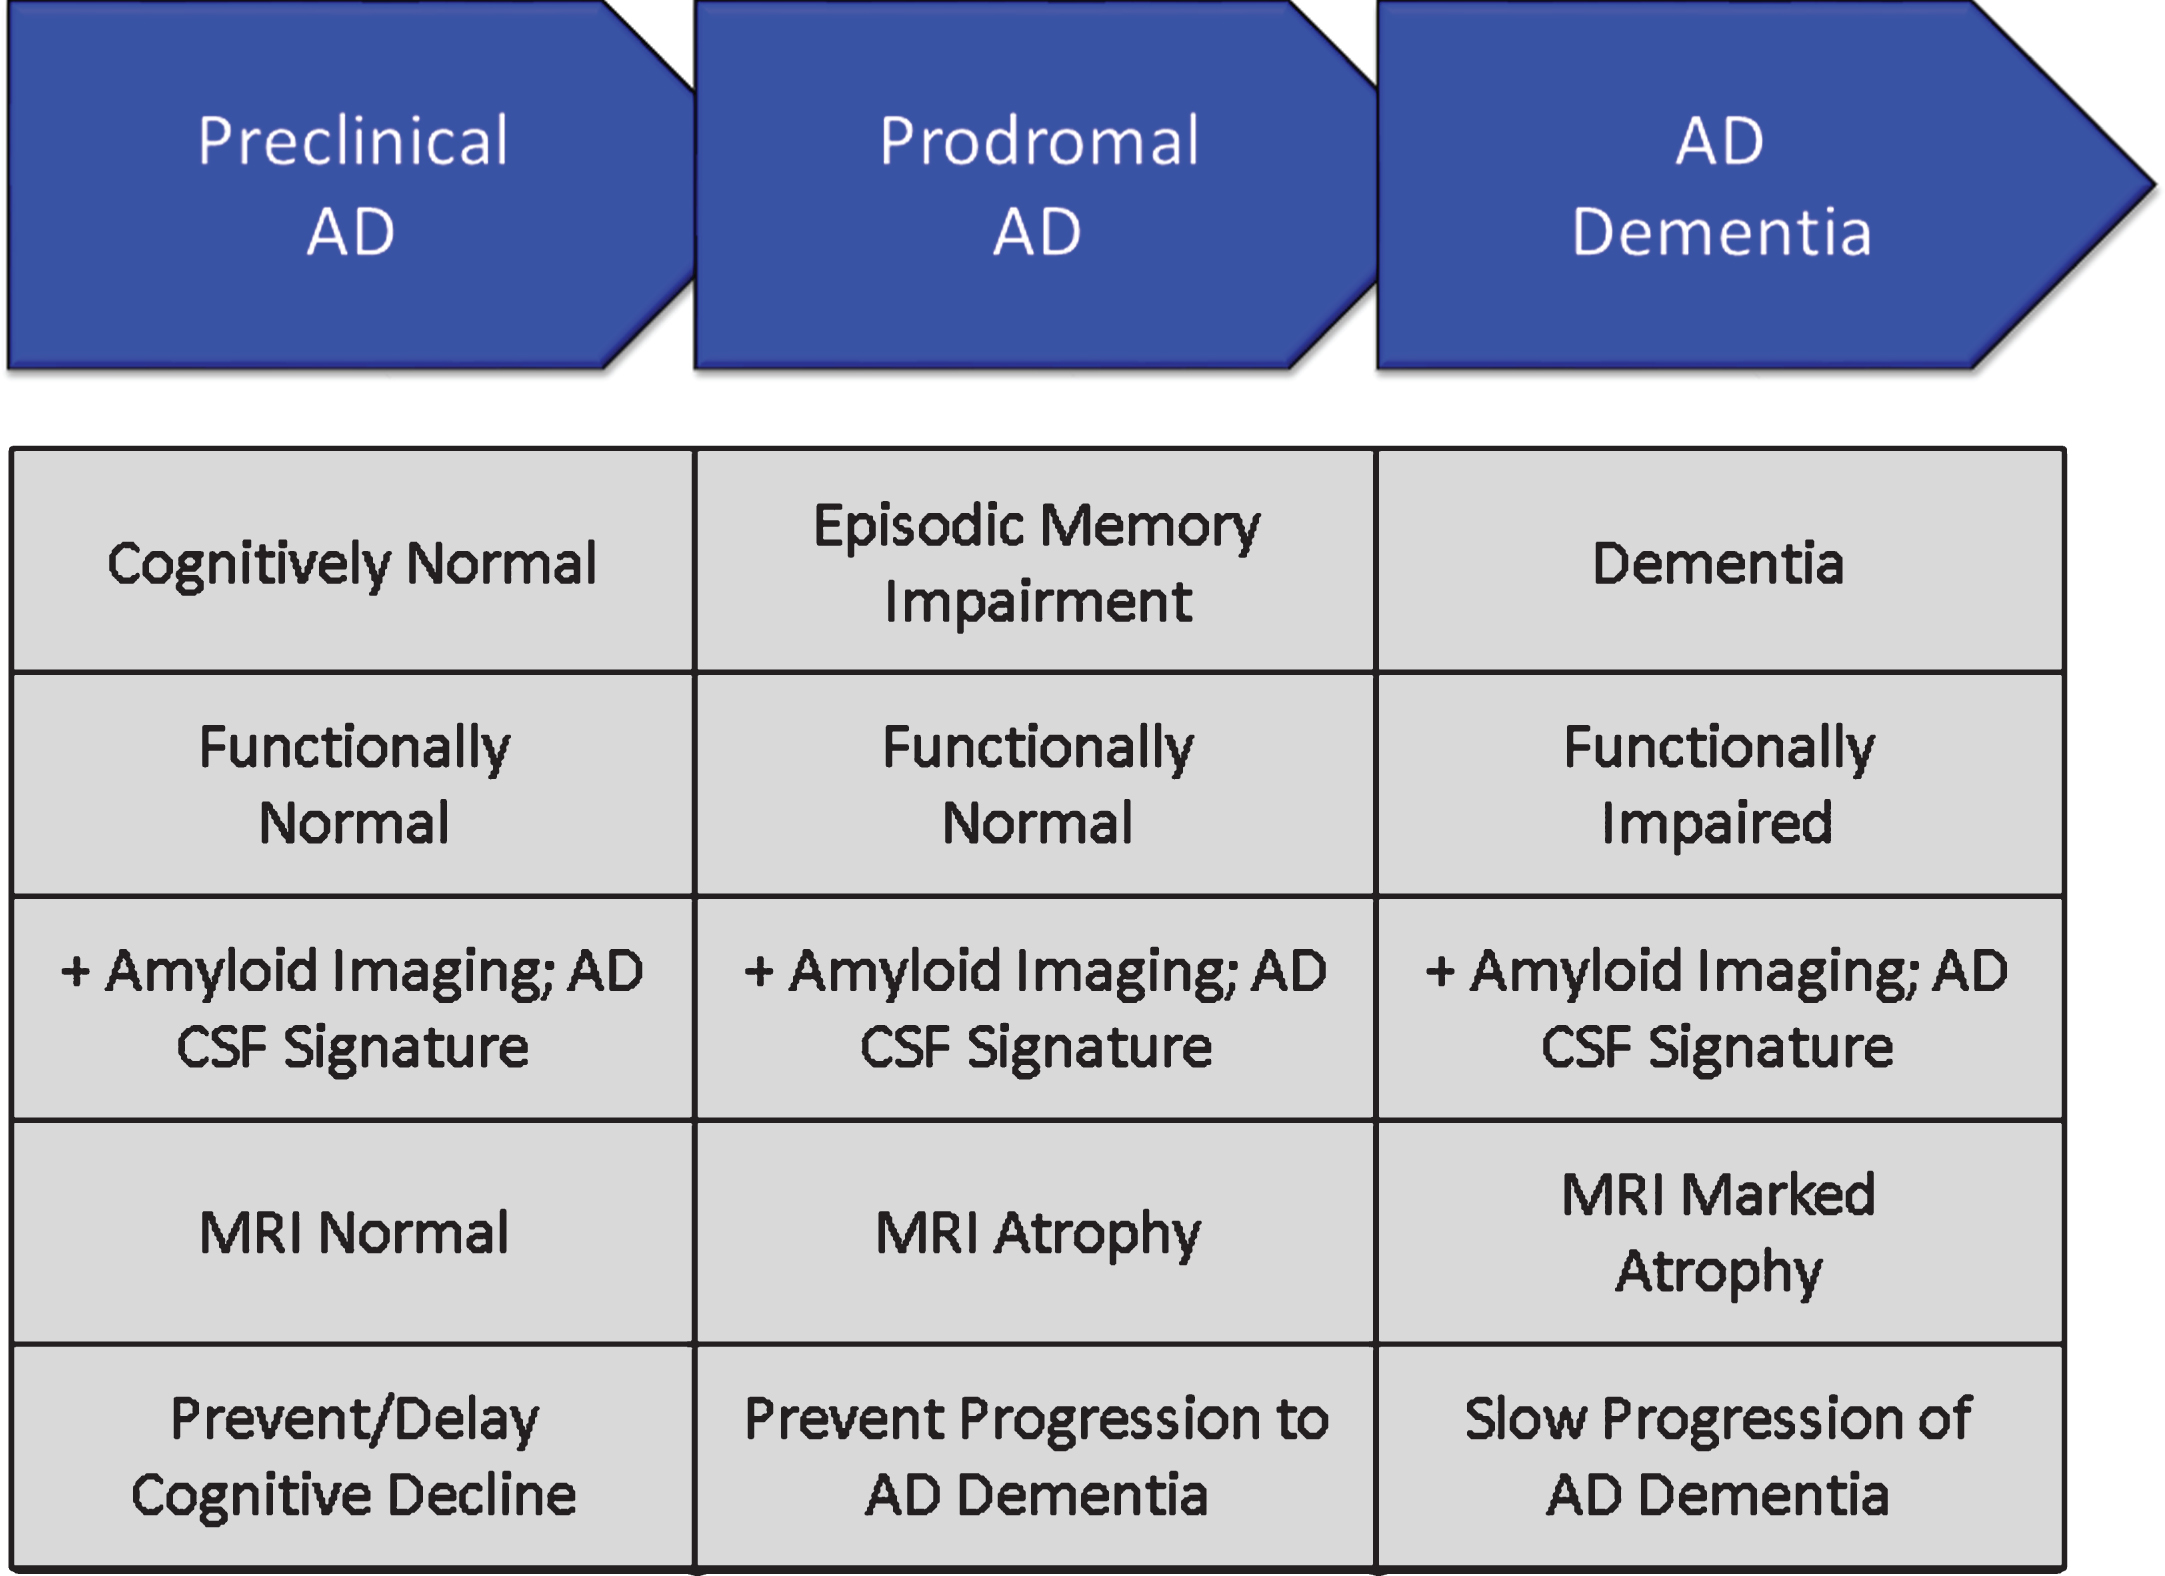 Phases of Alzheimer’s disease (AD) as defined by cognitive, functional, and biomarker observations. Trial goals for each phase are noted.